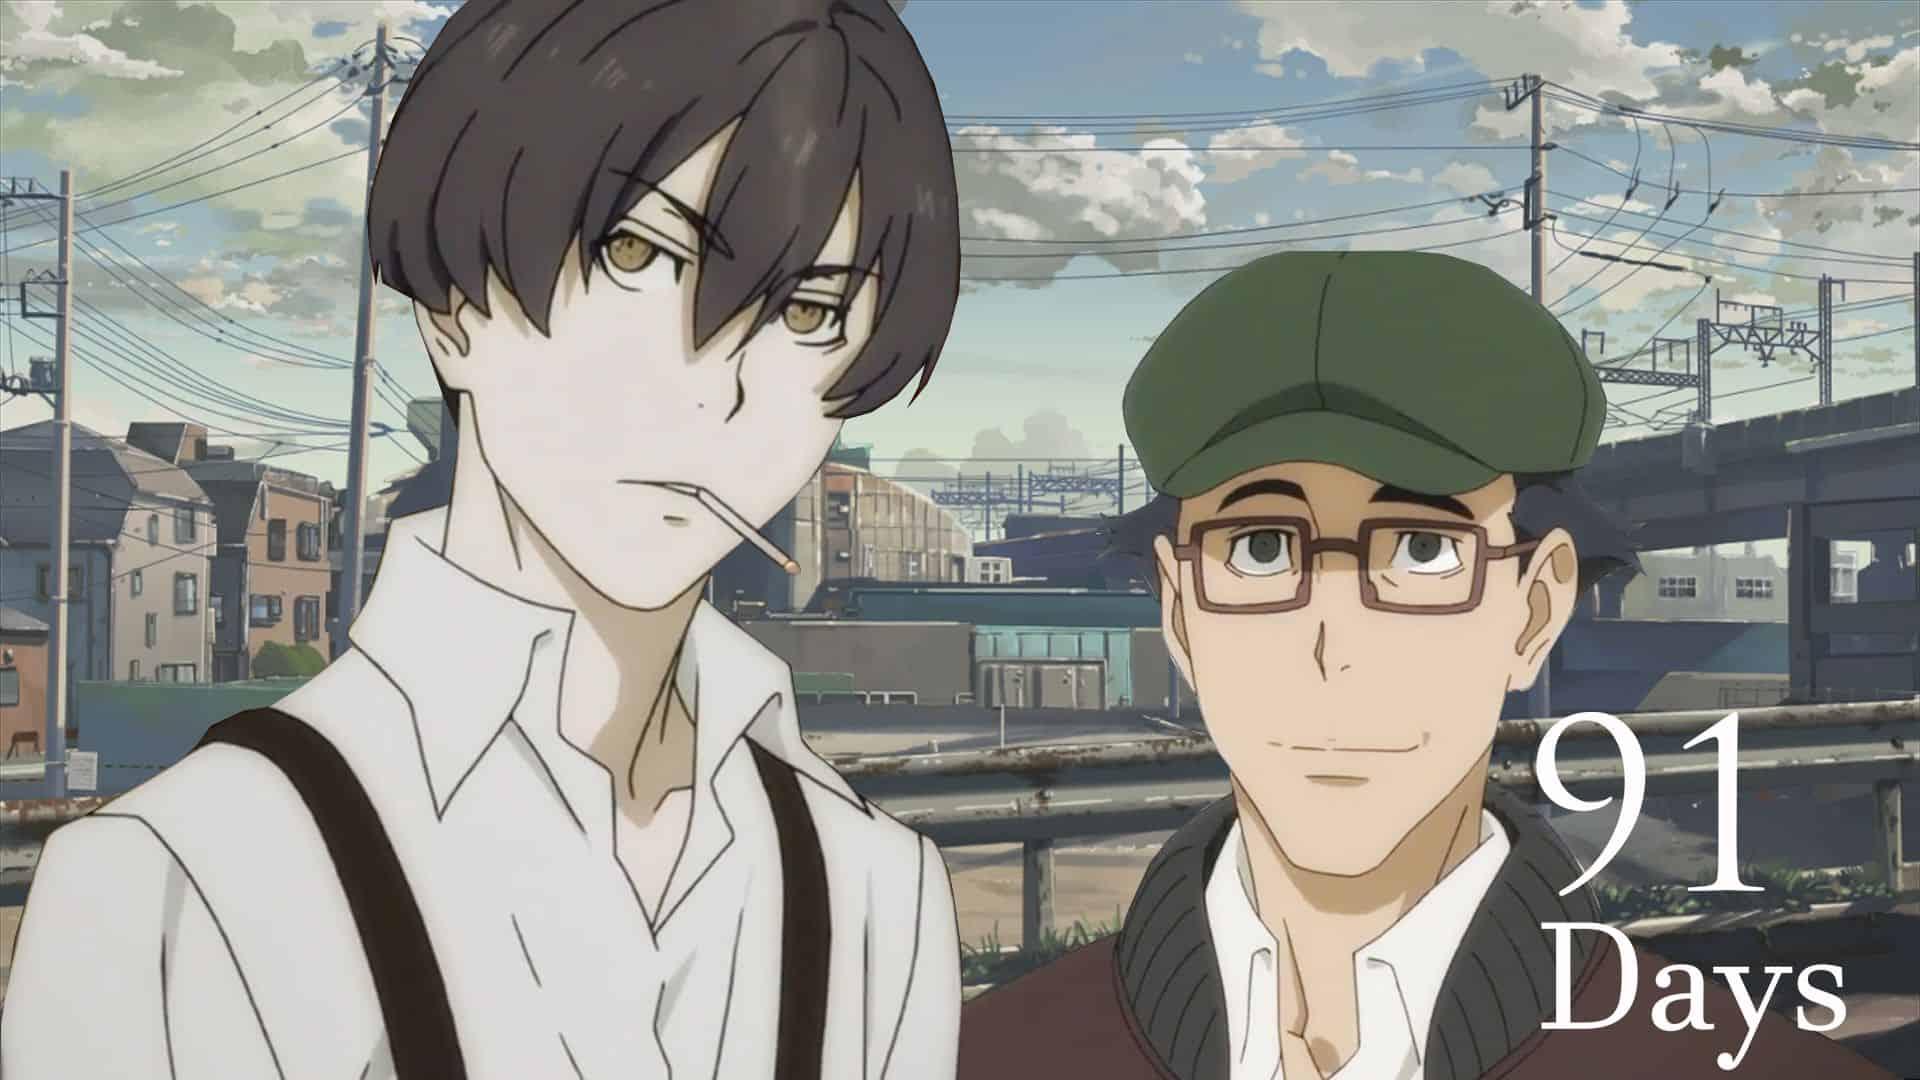 91 Days Anime: Exploring the Possibility of Season 2